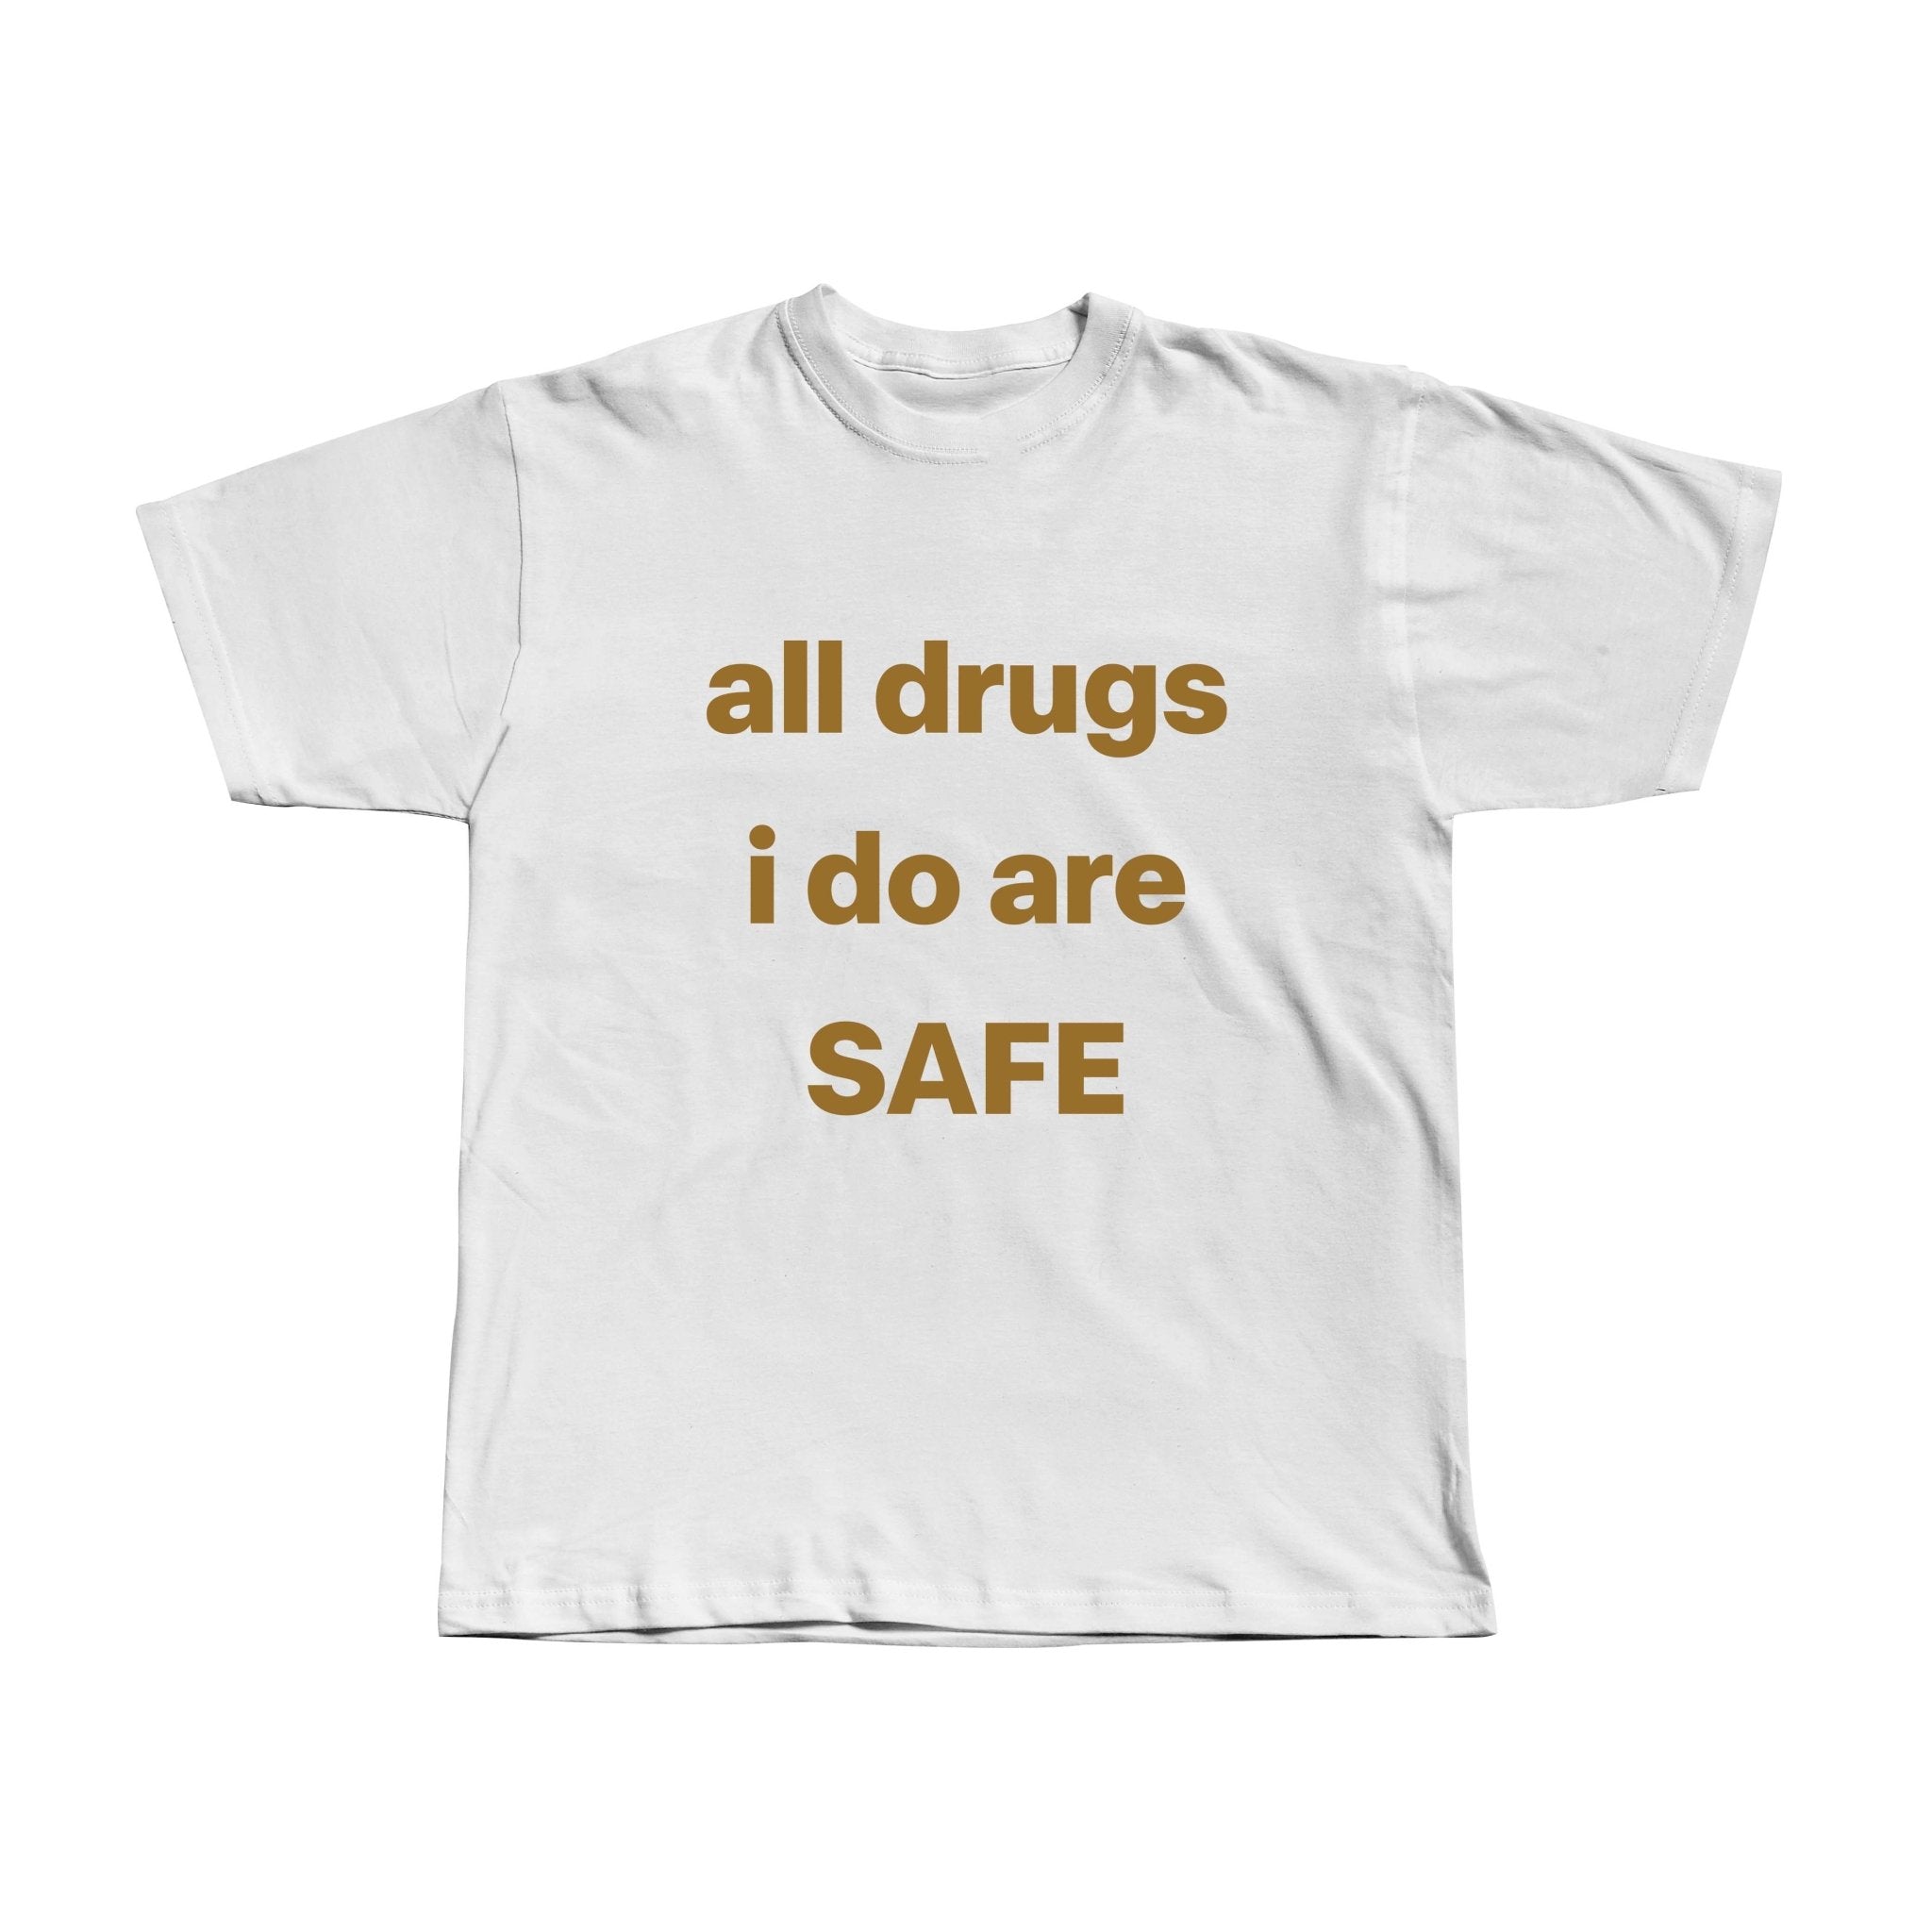 All drugs I do are safe - WEARKOS